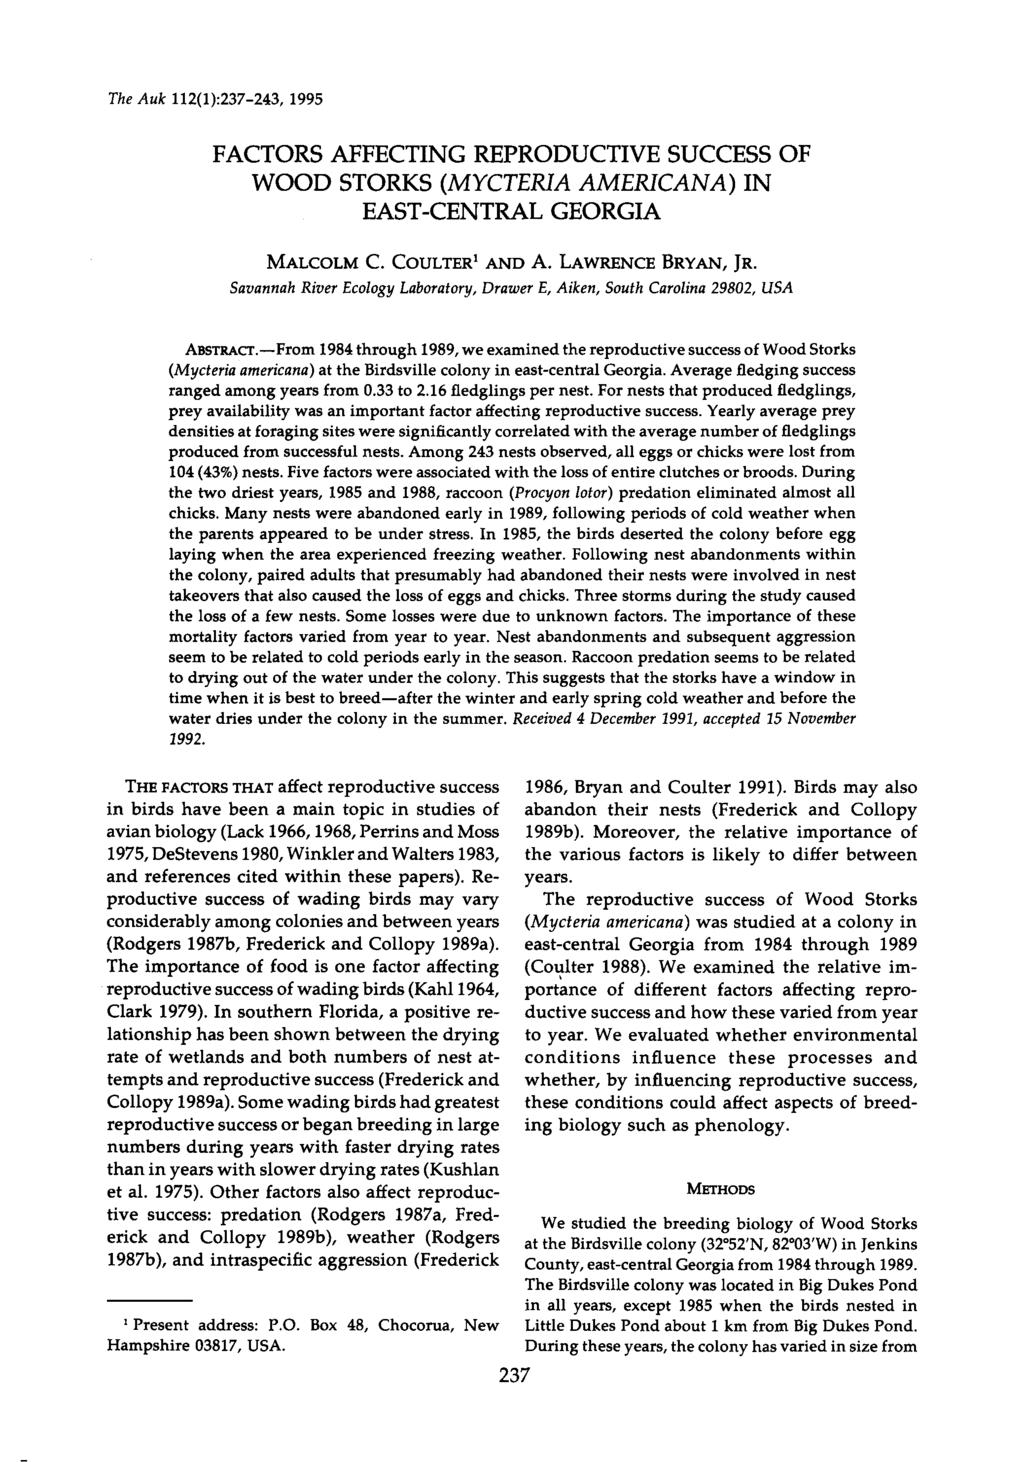 The Auk 112(1):237-243, 1995 FACTORS AFFECTING REPRODUCTIVE SUCCESS OF WOOD STORKS (MYCTERIA AMERICANA) IN EAST-CENTRAL GEORGIA MALCOLM C. COULTER AND A. LAWRENCE BRYAN, JR.